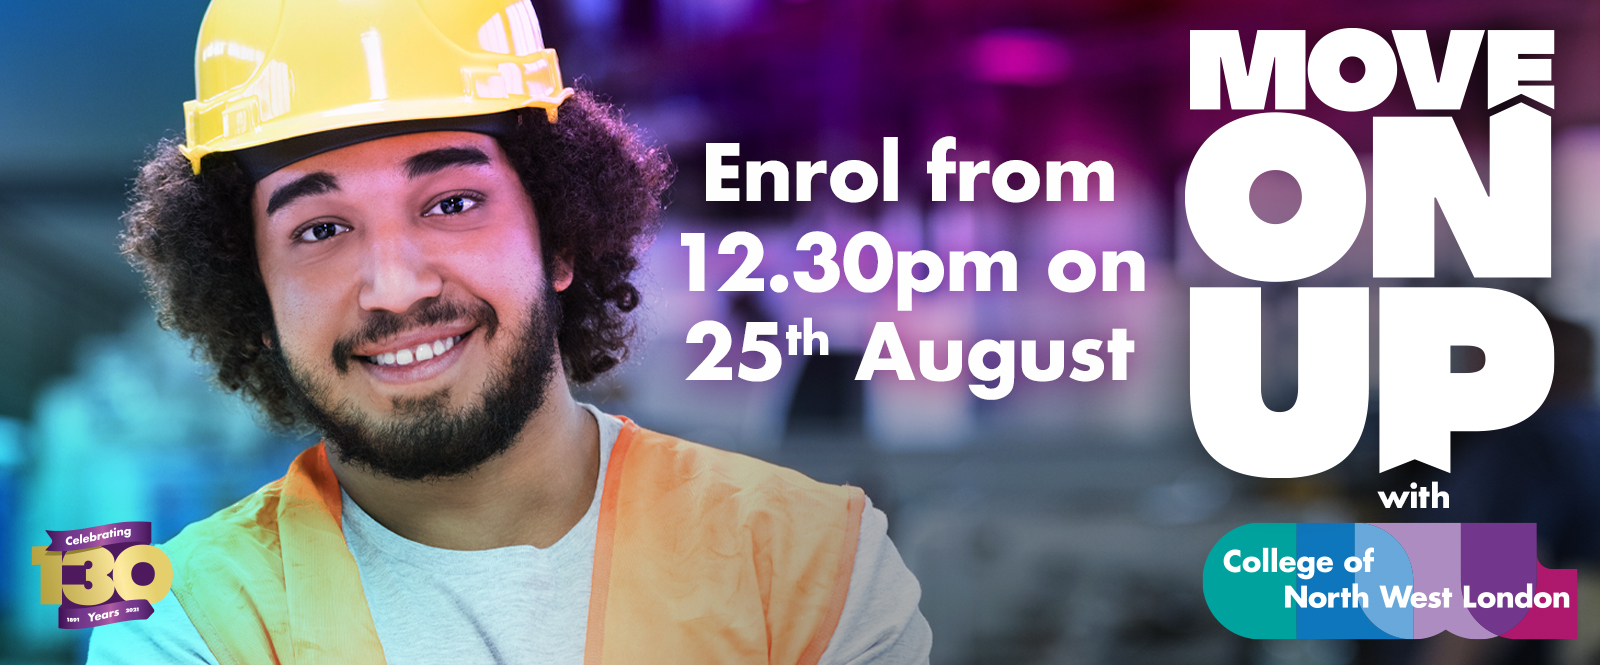 Enrol from 25th August